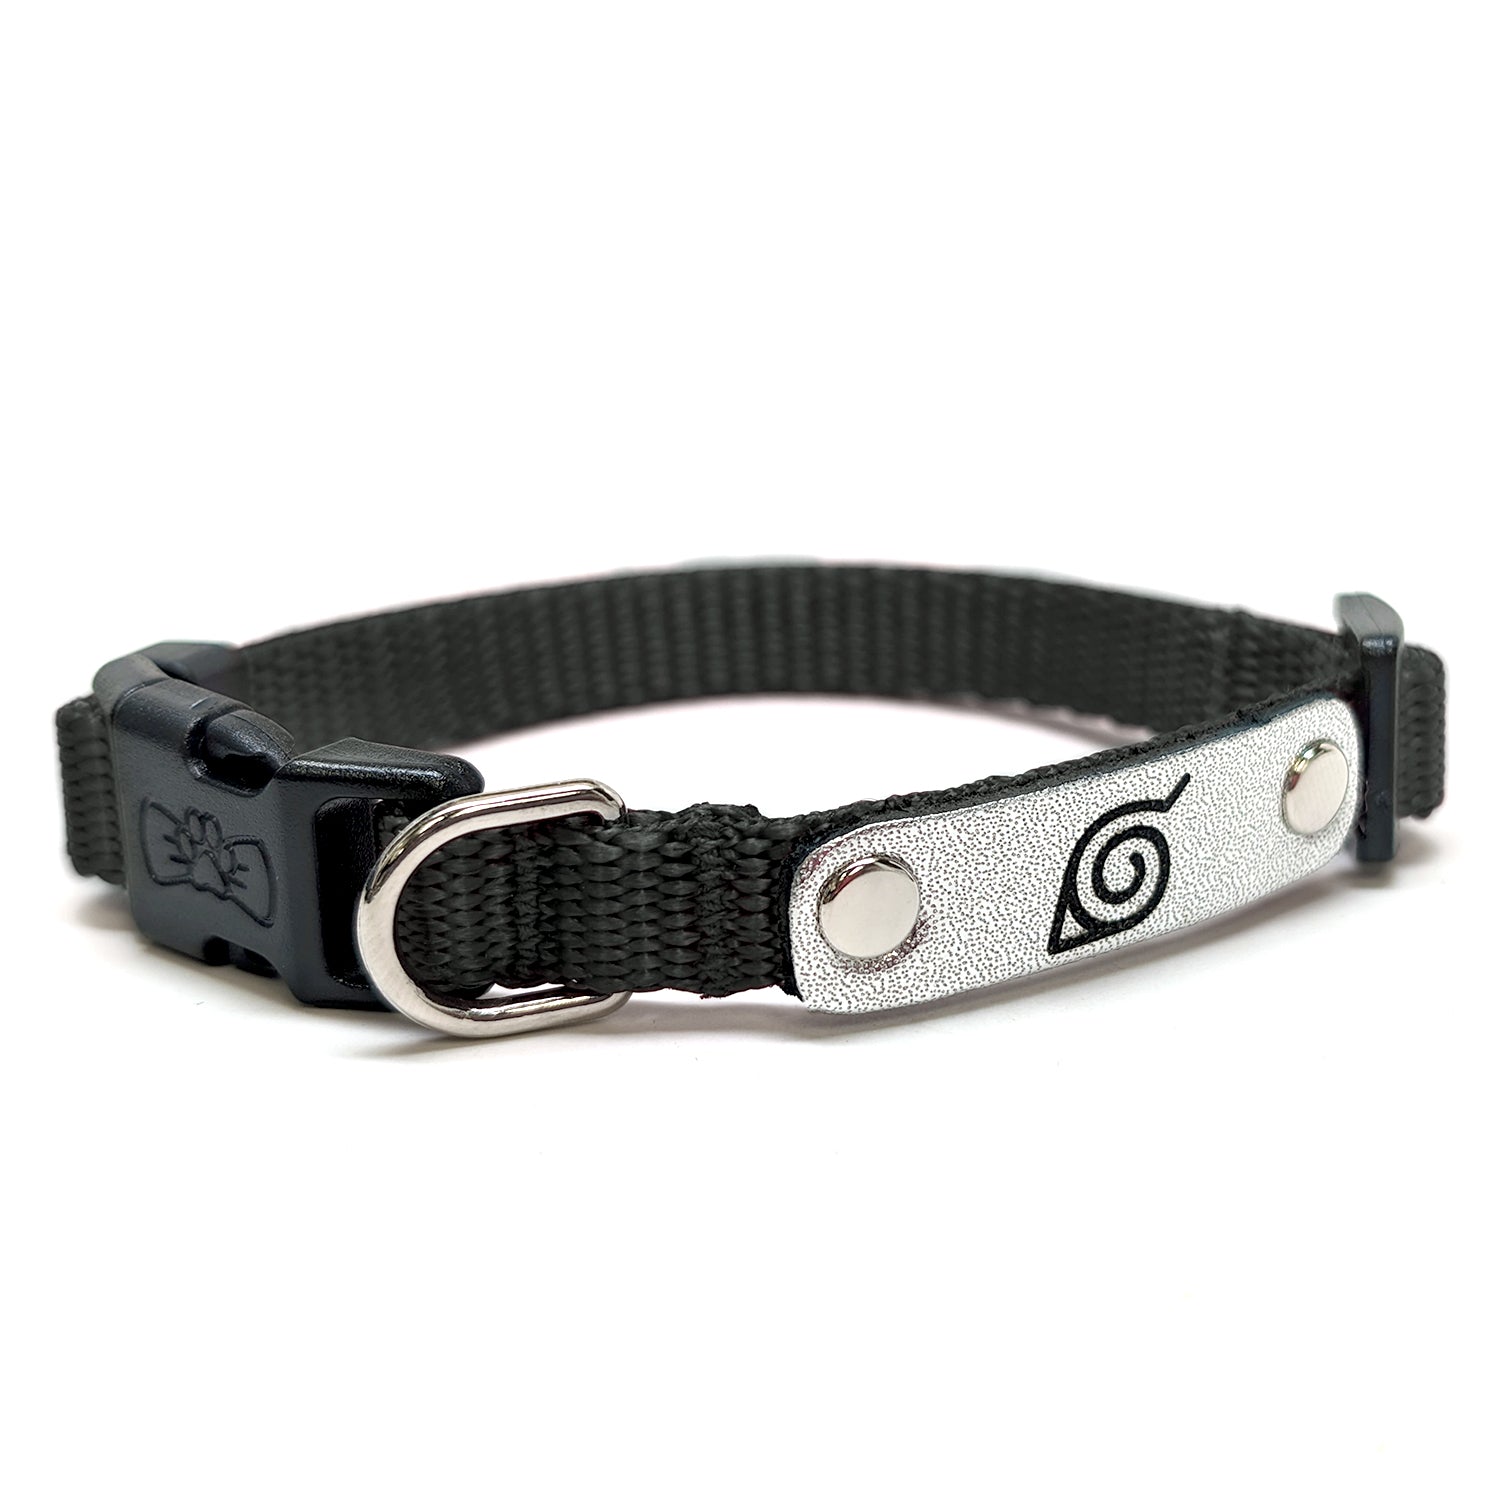 Naruto Shippuden x Pawsonify - Officially Licensed Ninja Collar (Black) for XS Dogs #size_Dog: (XS) 8.5-12